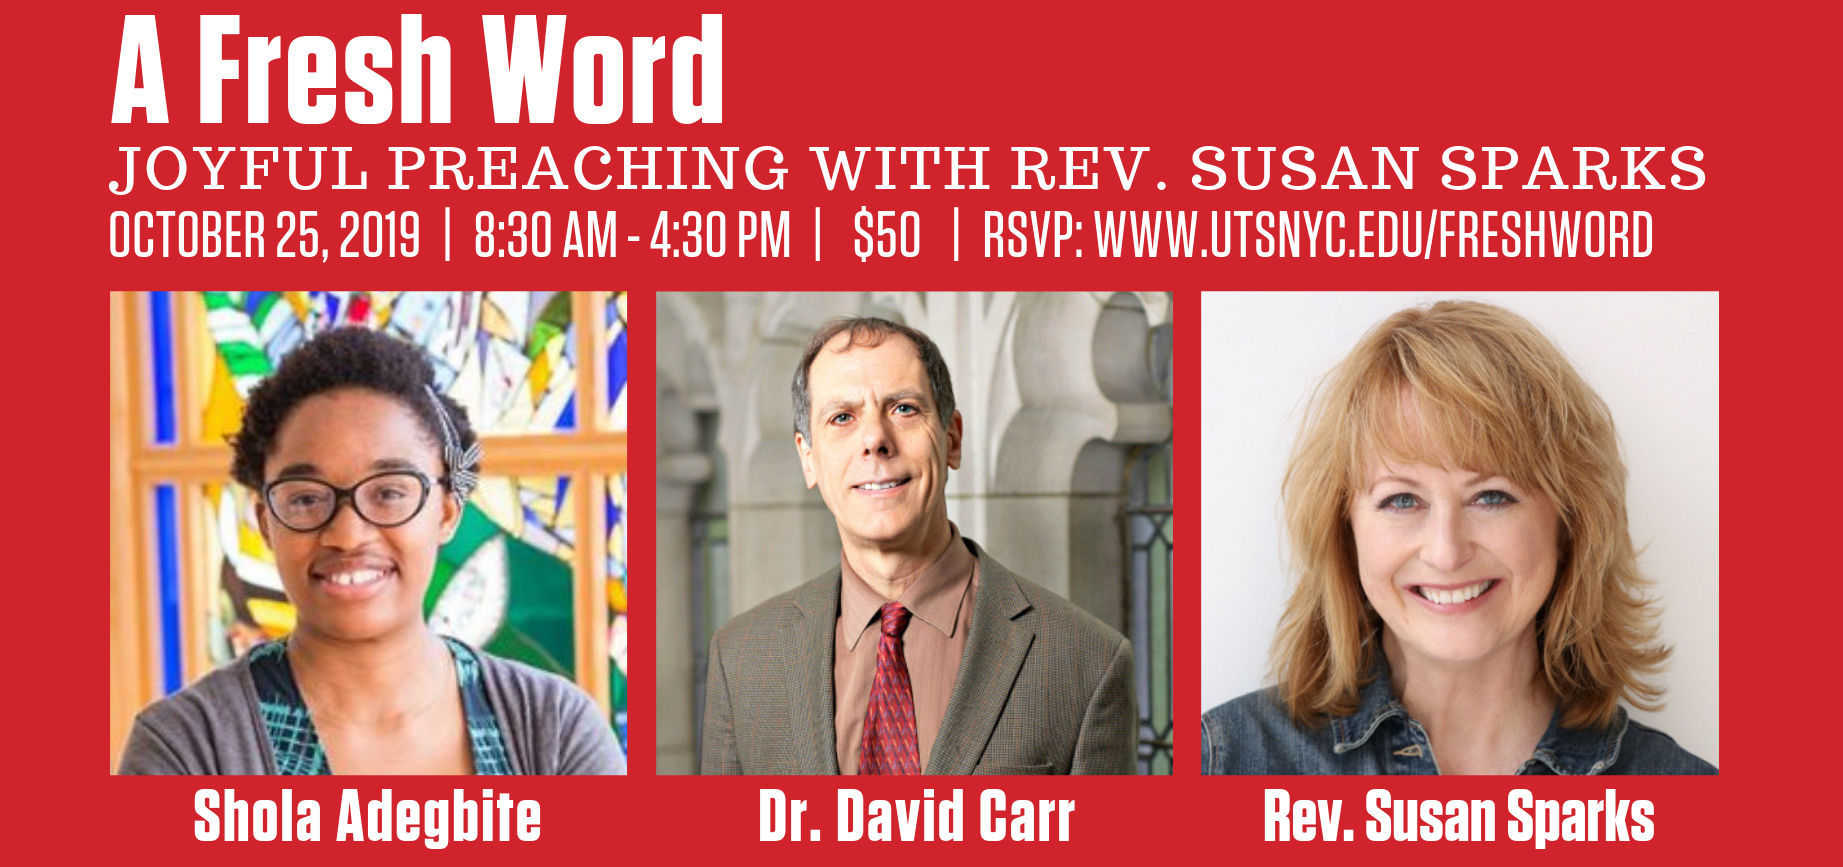 Banner Image the event title - Joyful Preaching: Laugh Your Way to Grace and the headshots of our three speakers - Shola Adegbite, David Carr, and Susan Sparks